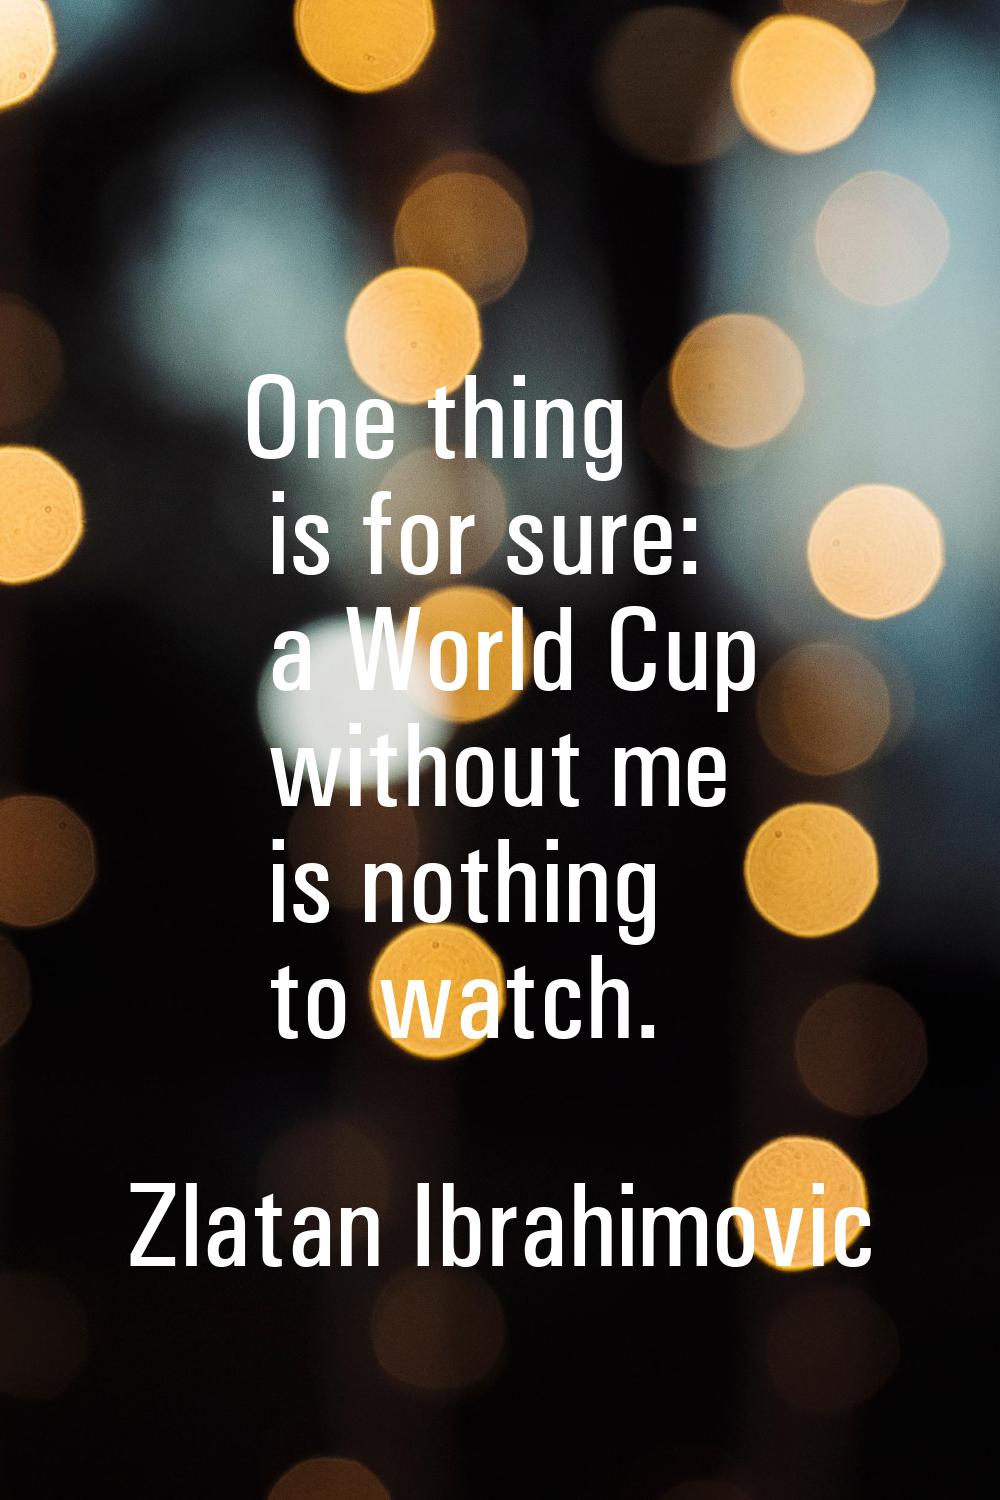 One thing is for sure: a World Cup without me is nothing to watch.